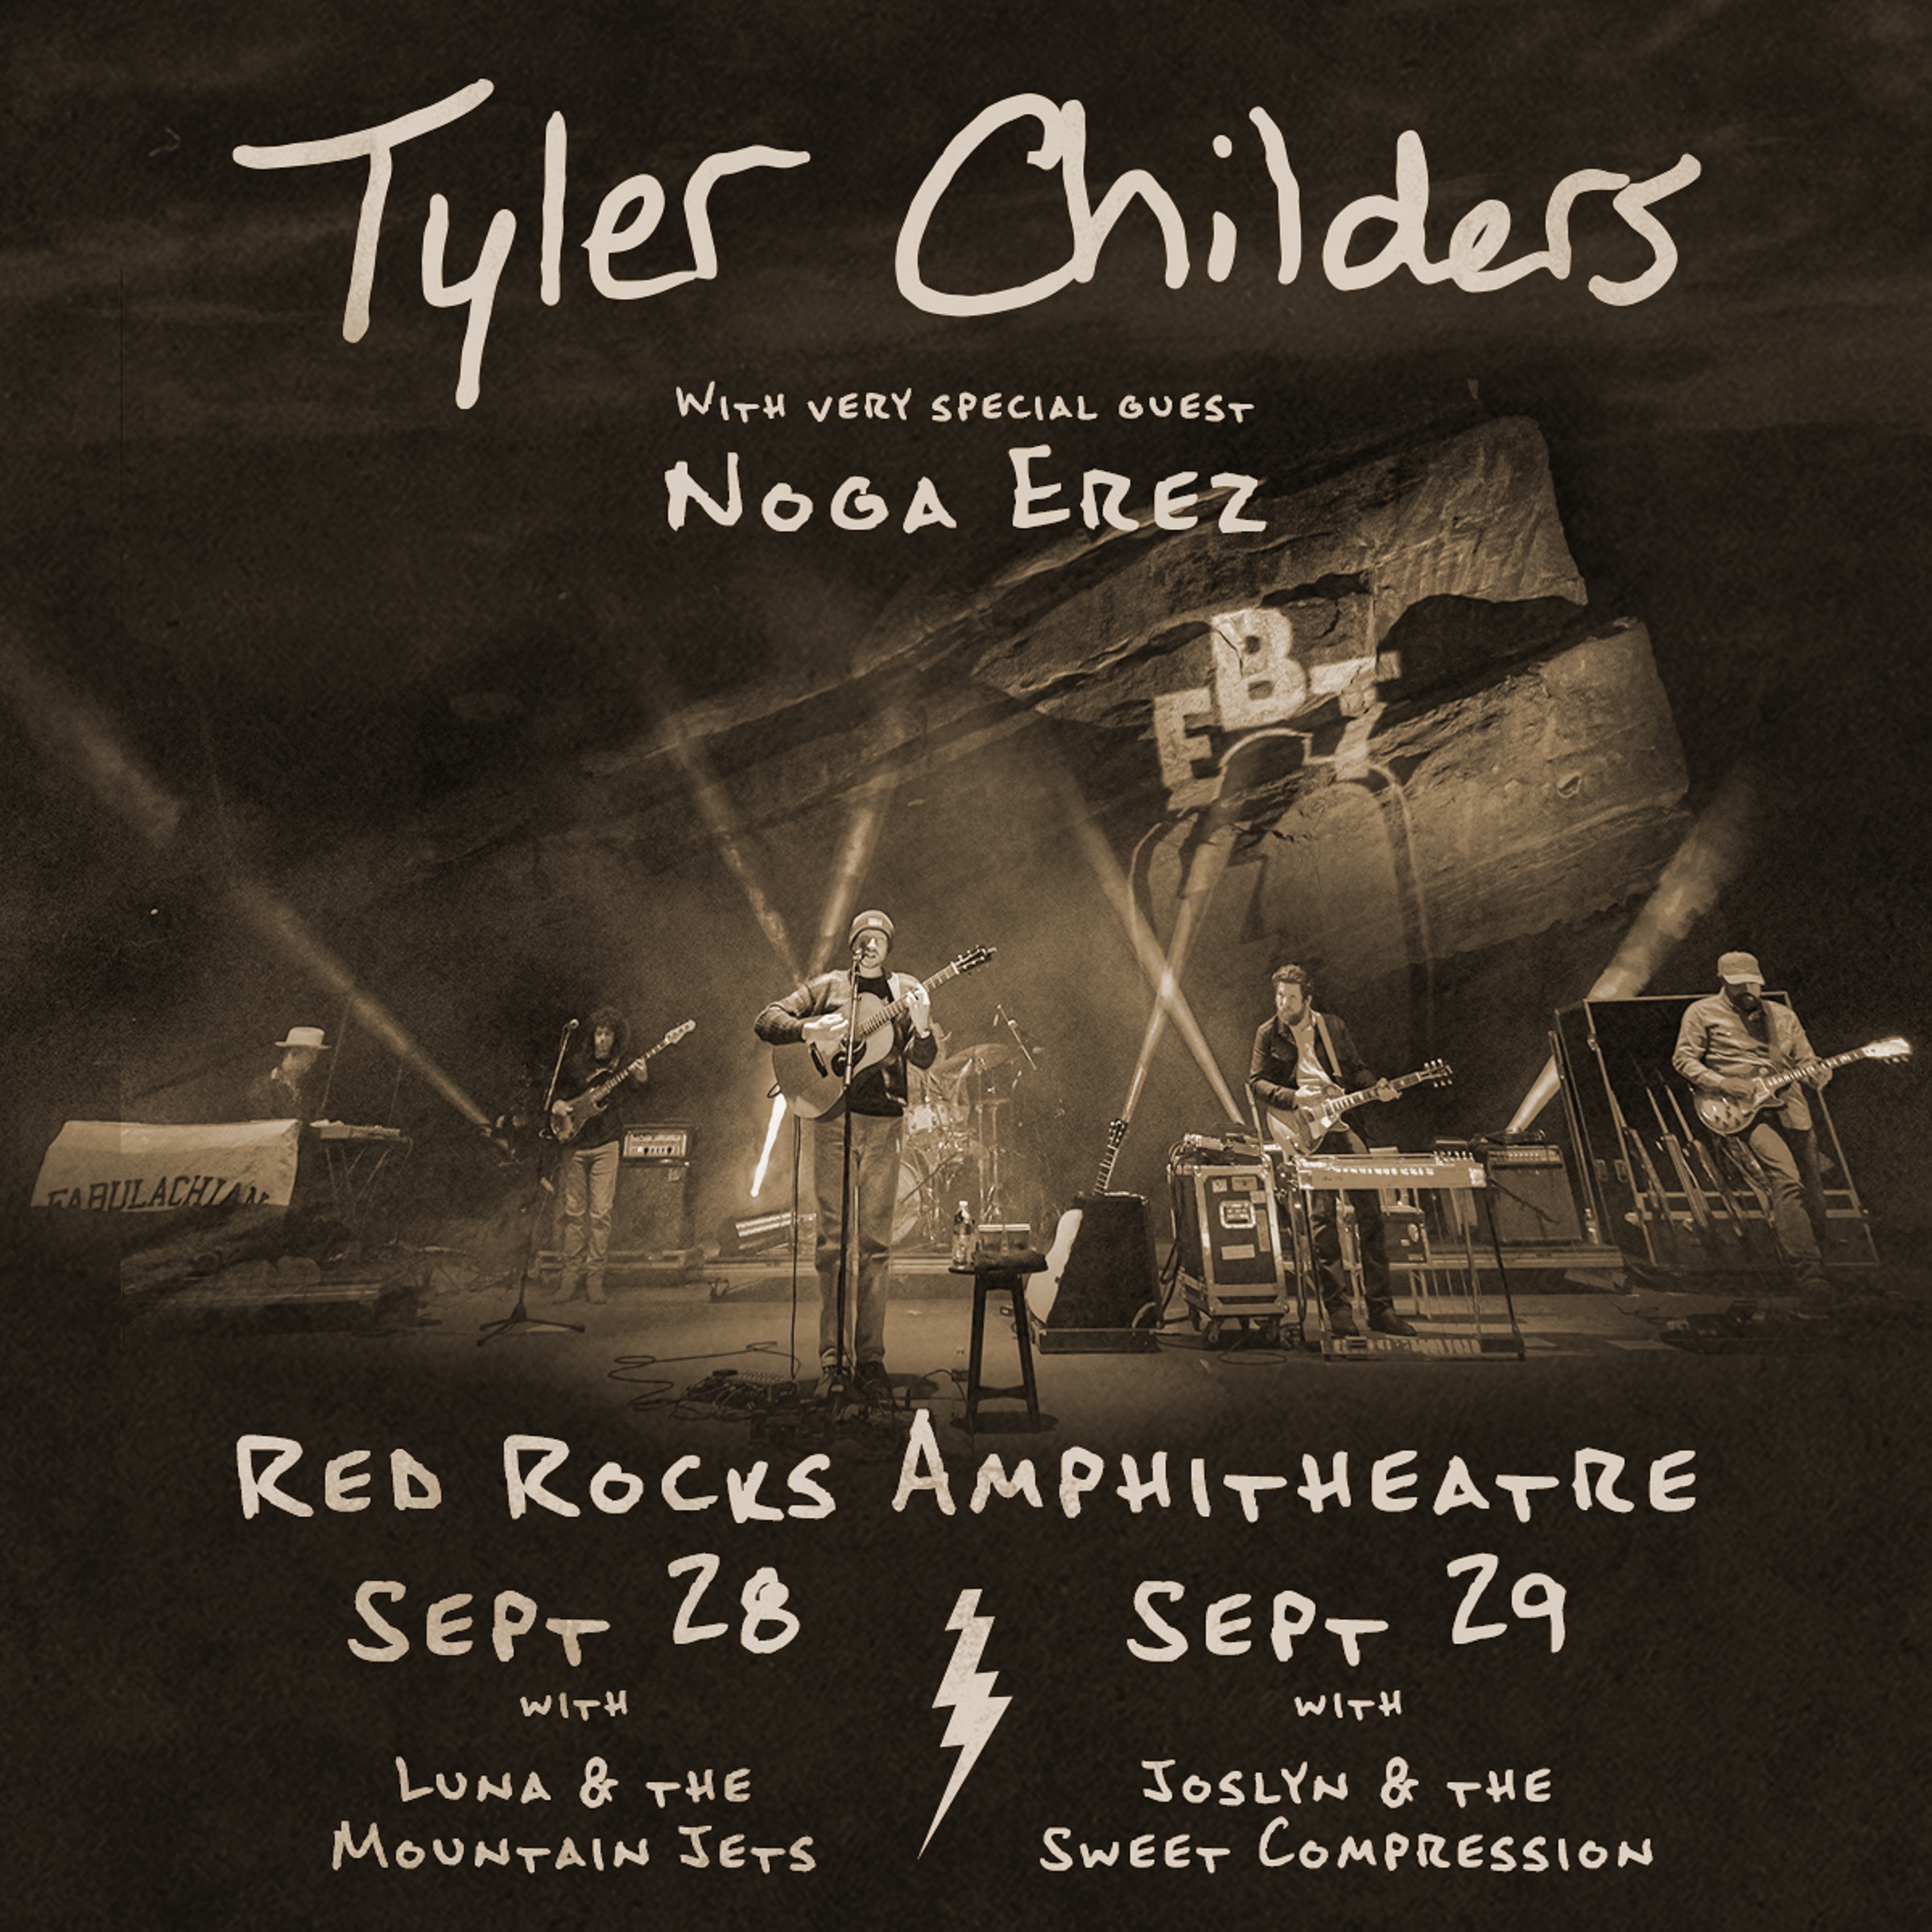 Tyler Childers announces two Red Rocks Amphitheatre Shows